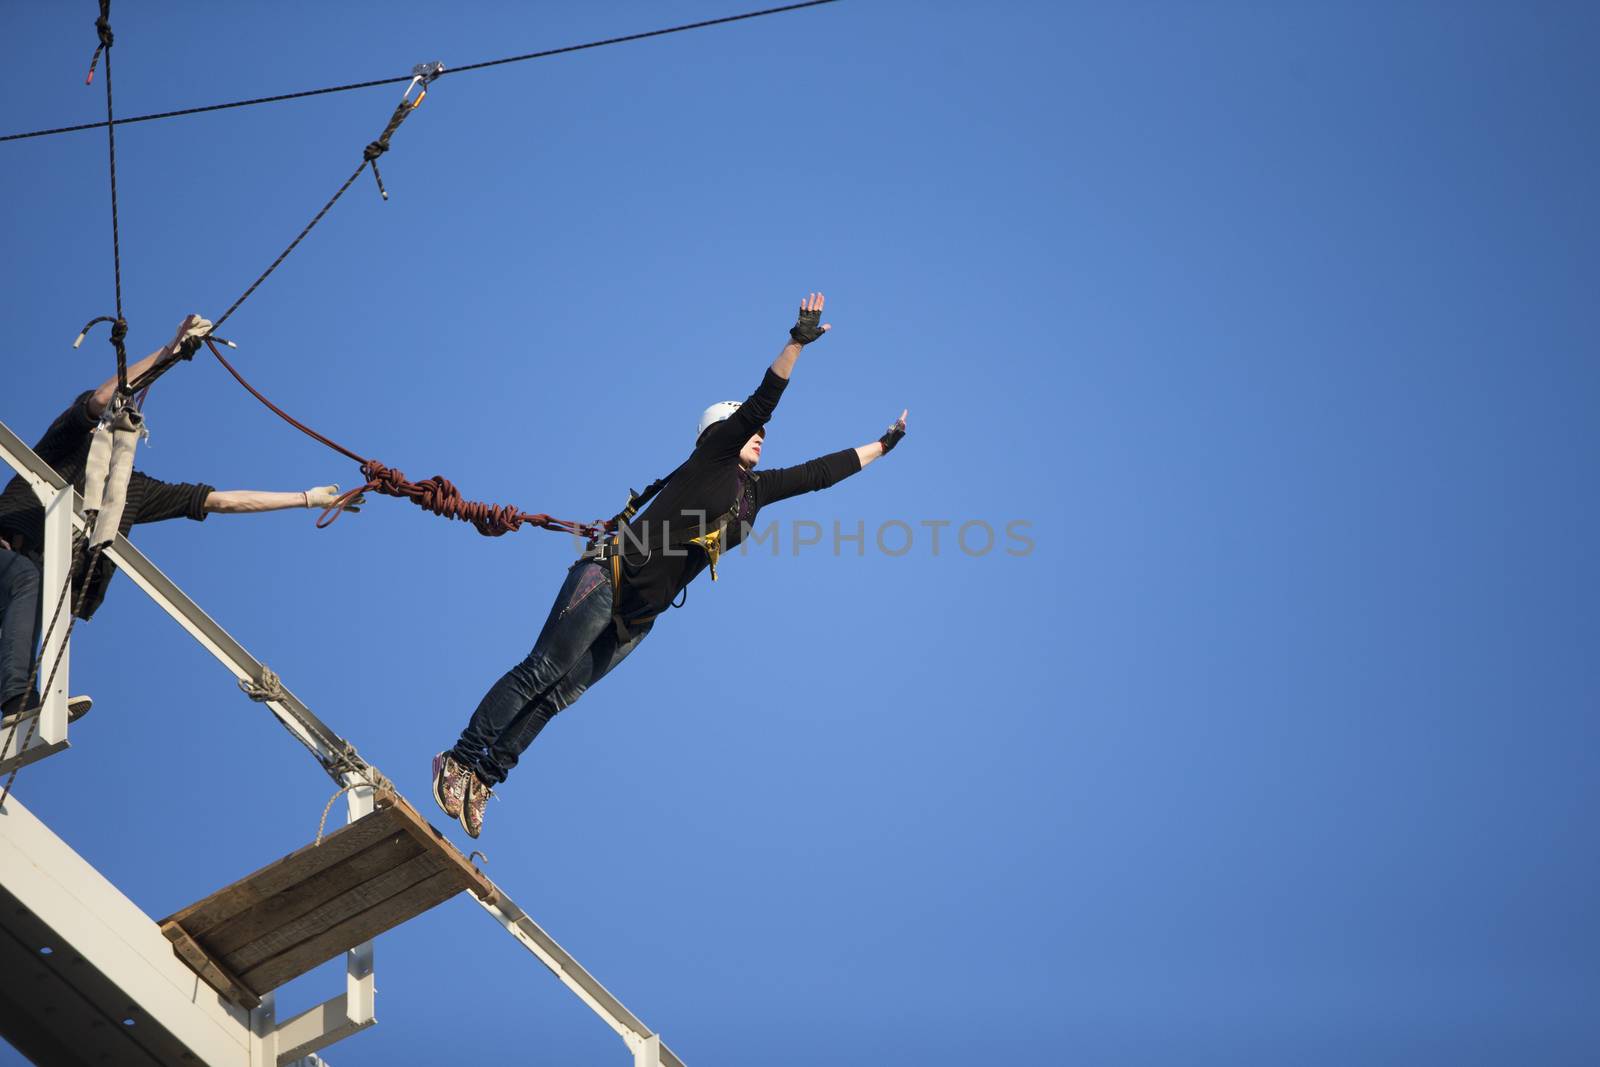 Elderly woman jumping from a bridgeJumping from the bridge with a rope. RoupeJumping